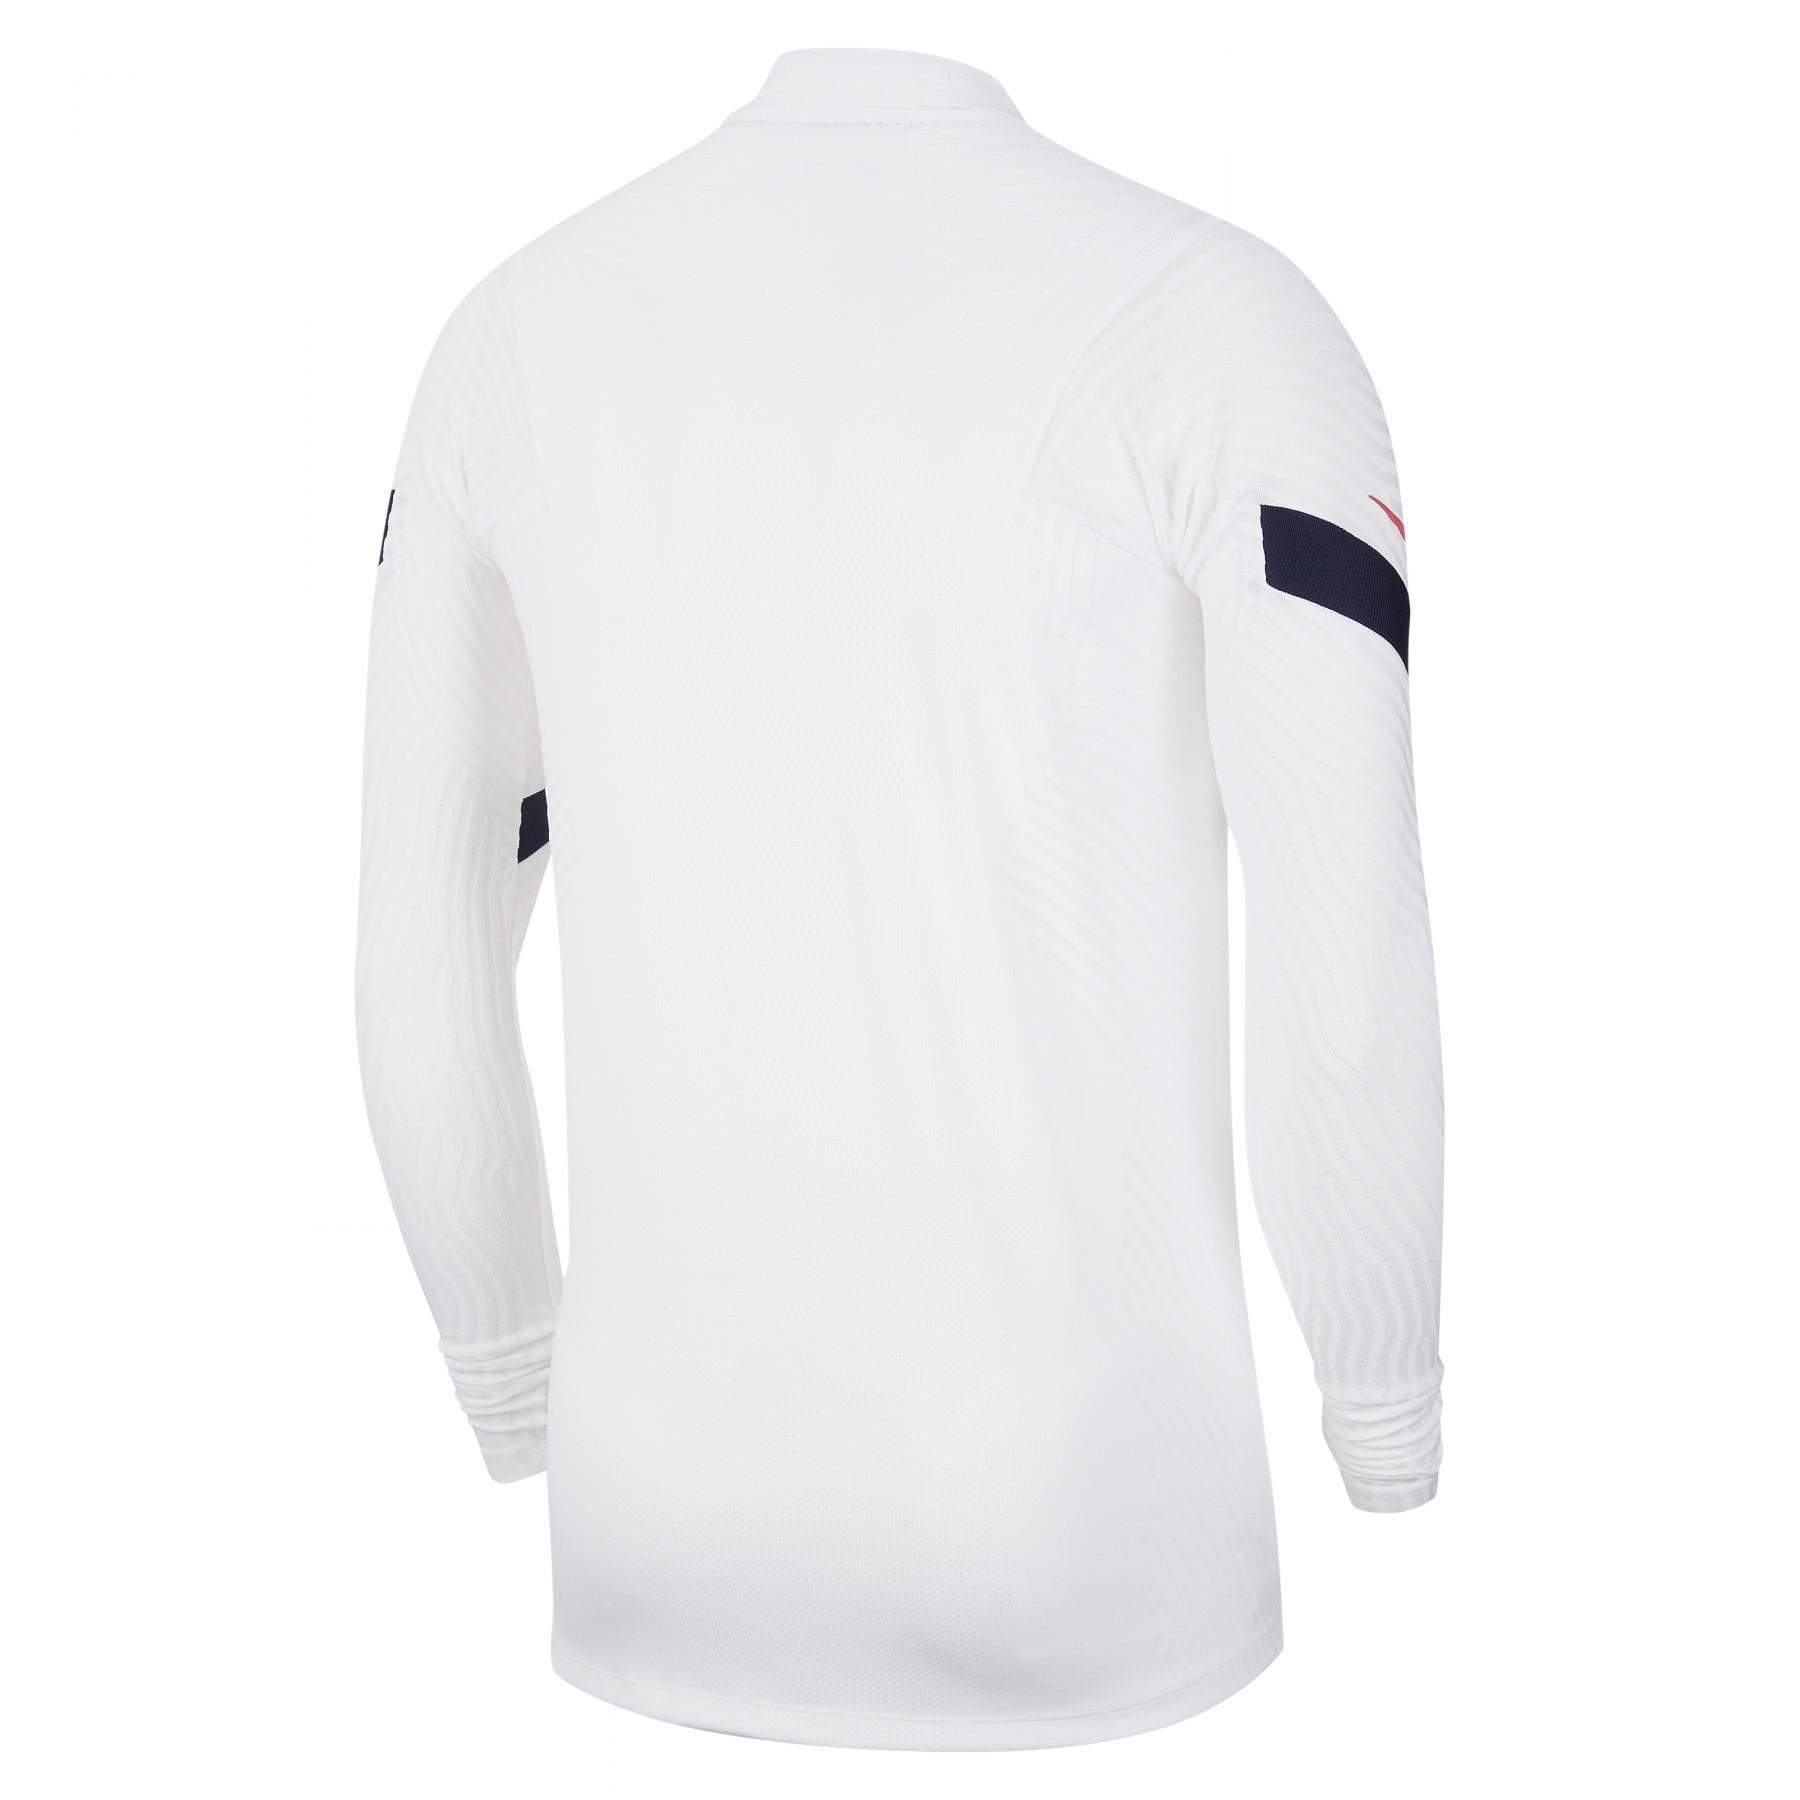 Training top France Euro 2021